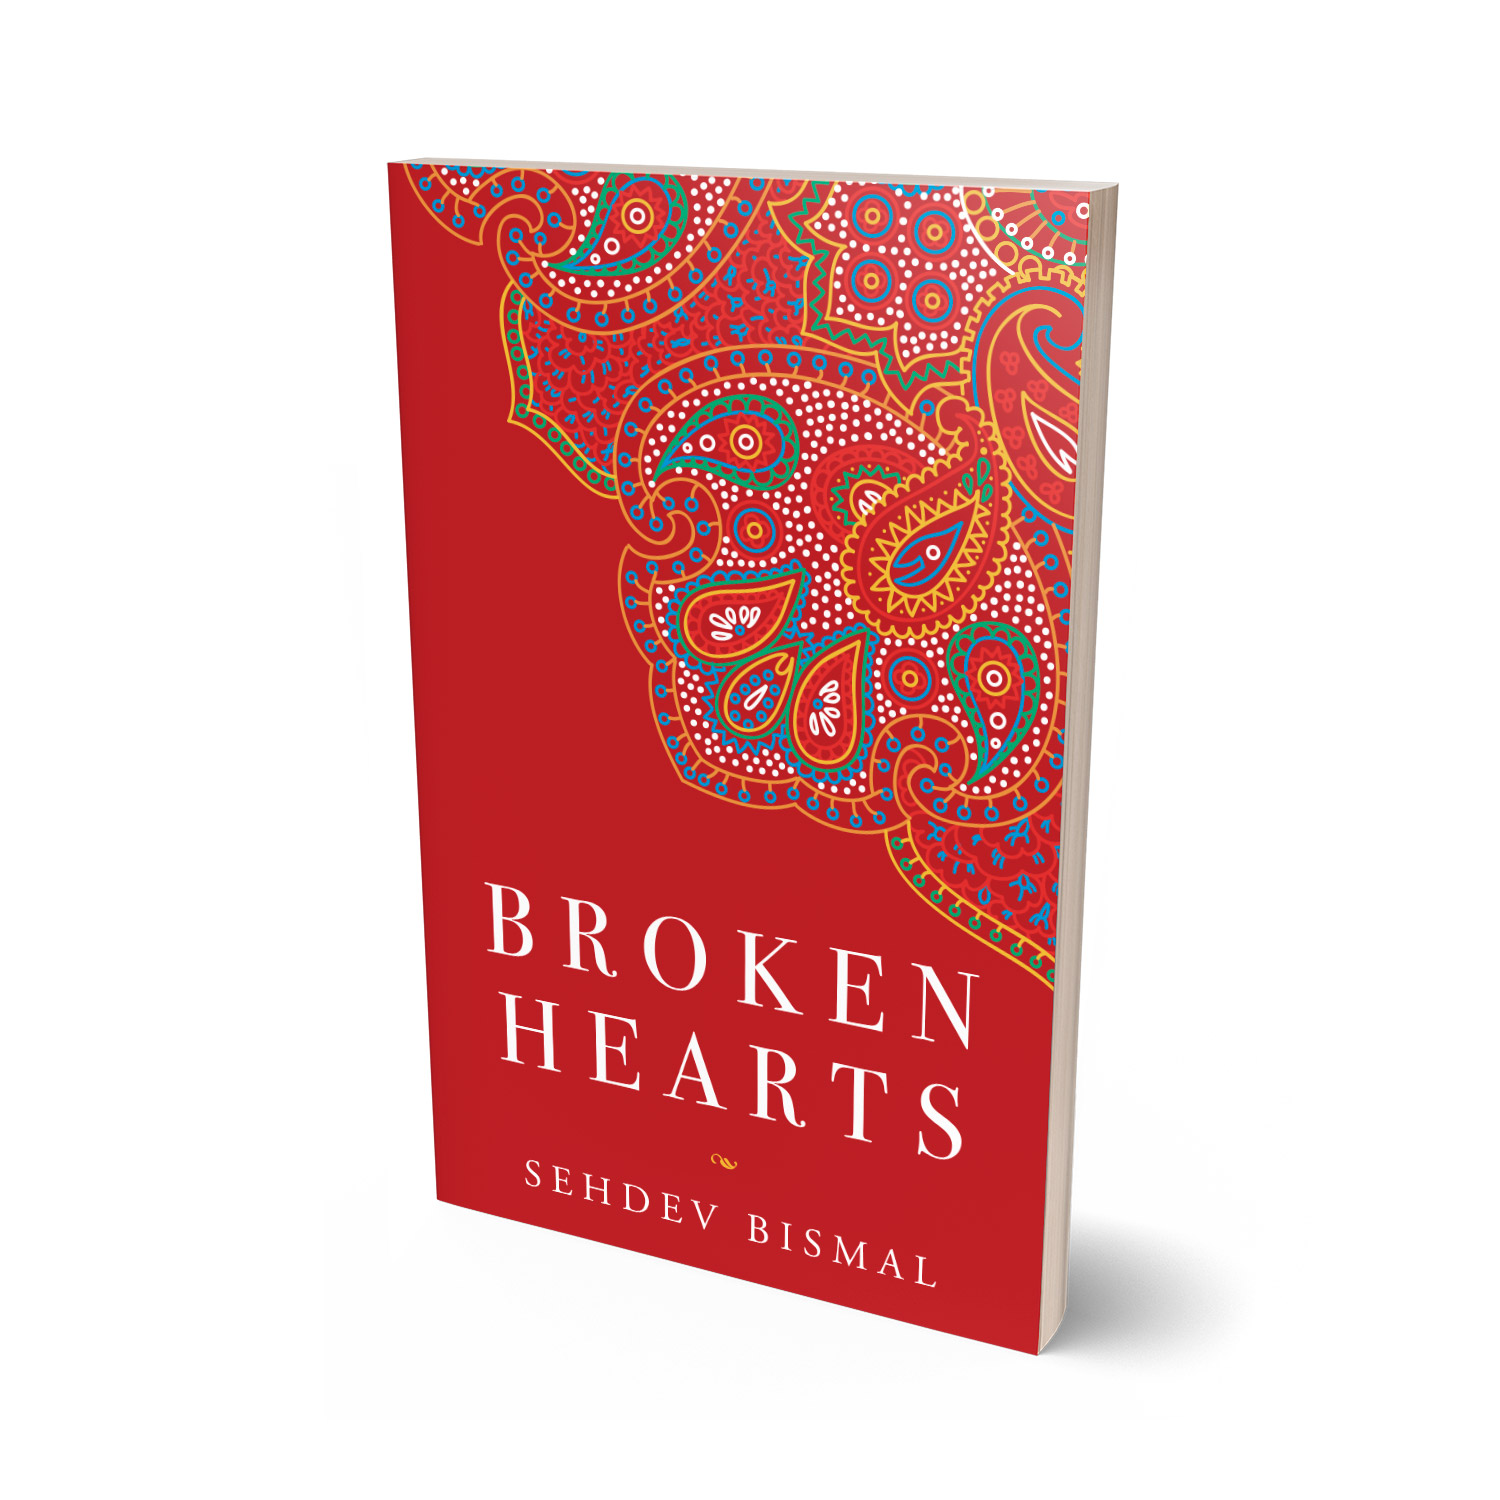 'Broken Hearts' is a heartfelt romantic drama, of love and loss. The author is Sehdev Bismal. The book cover design and interior formatting are by Mark Thomas. To learn more about what Mark could do for your book, please visit coverness.com.